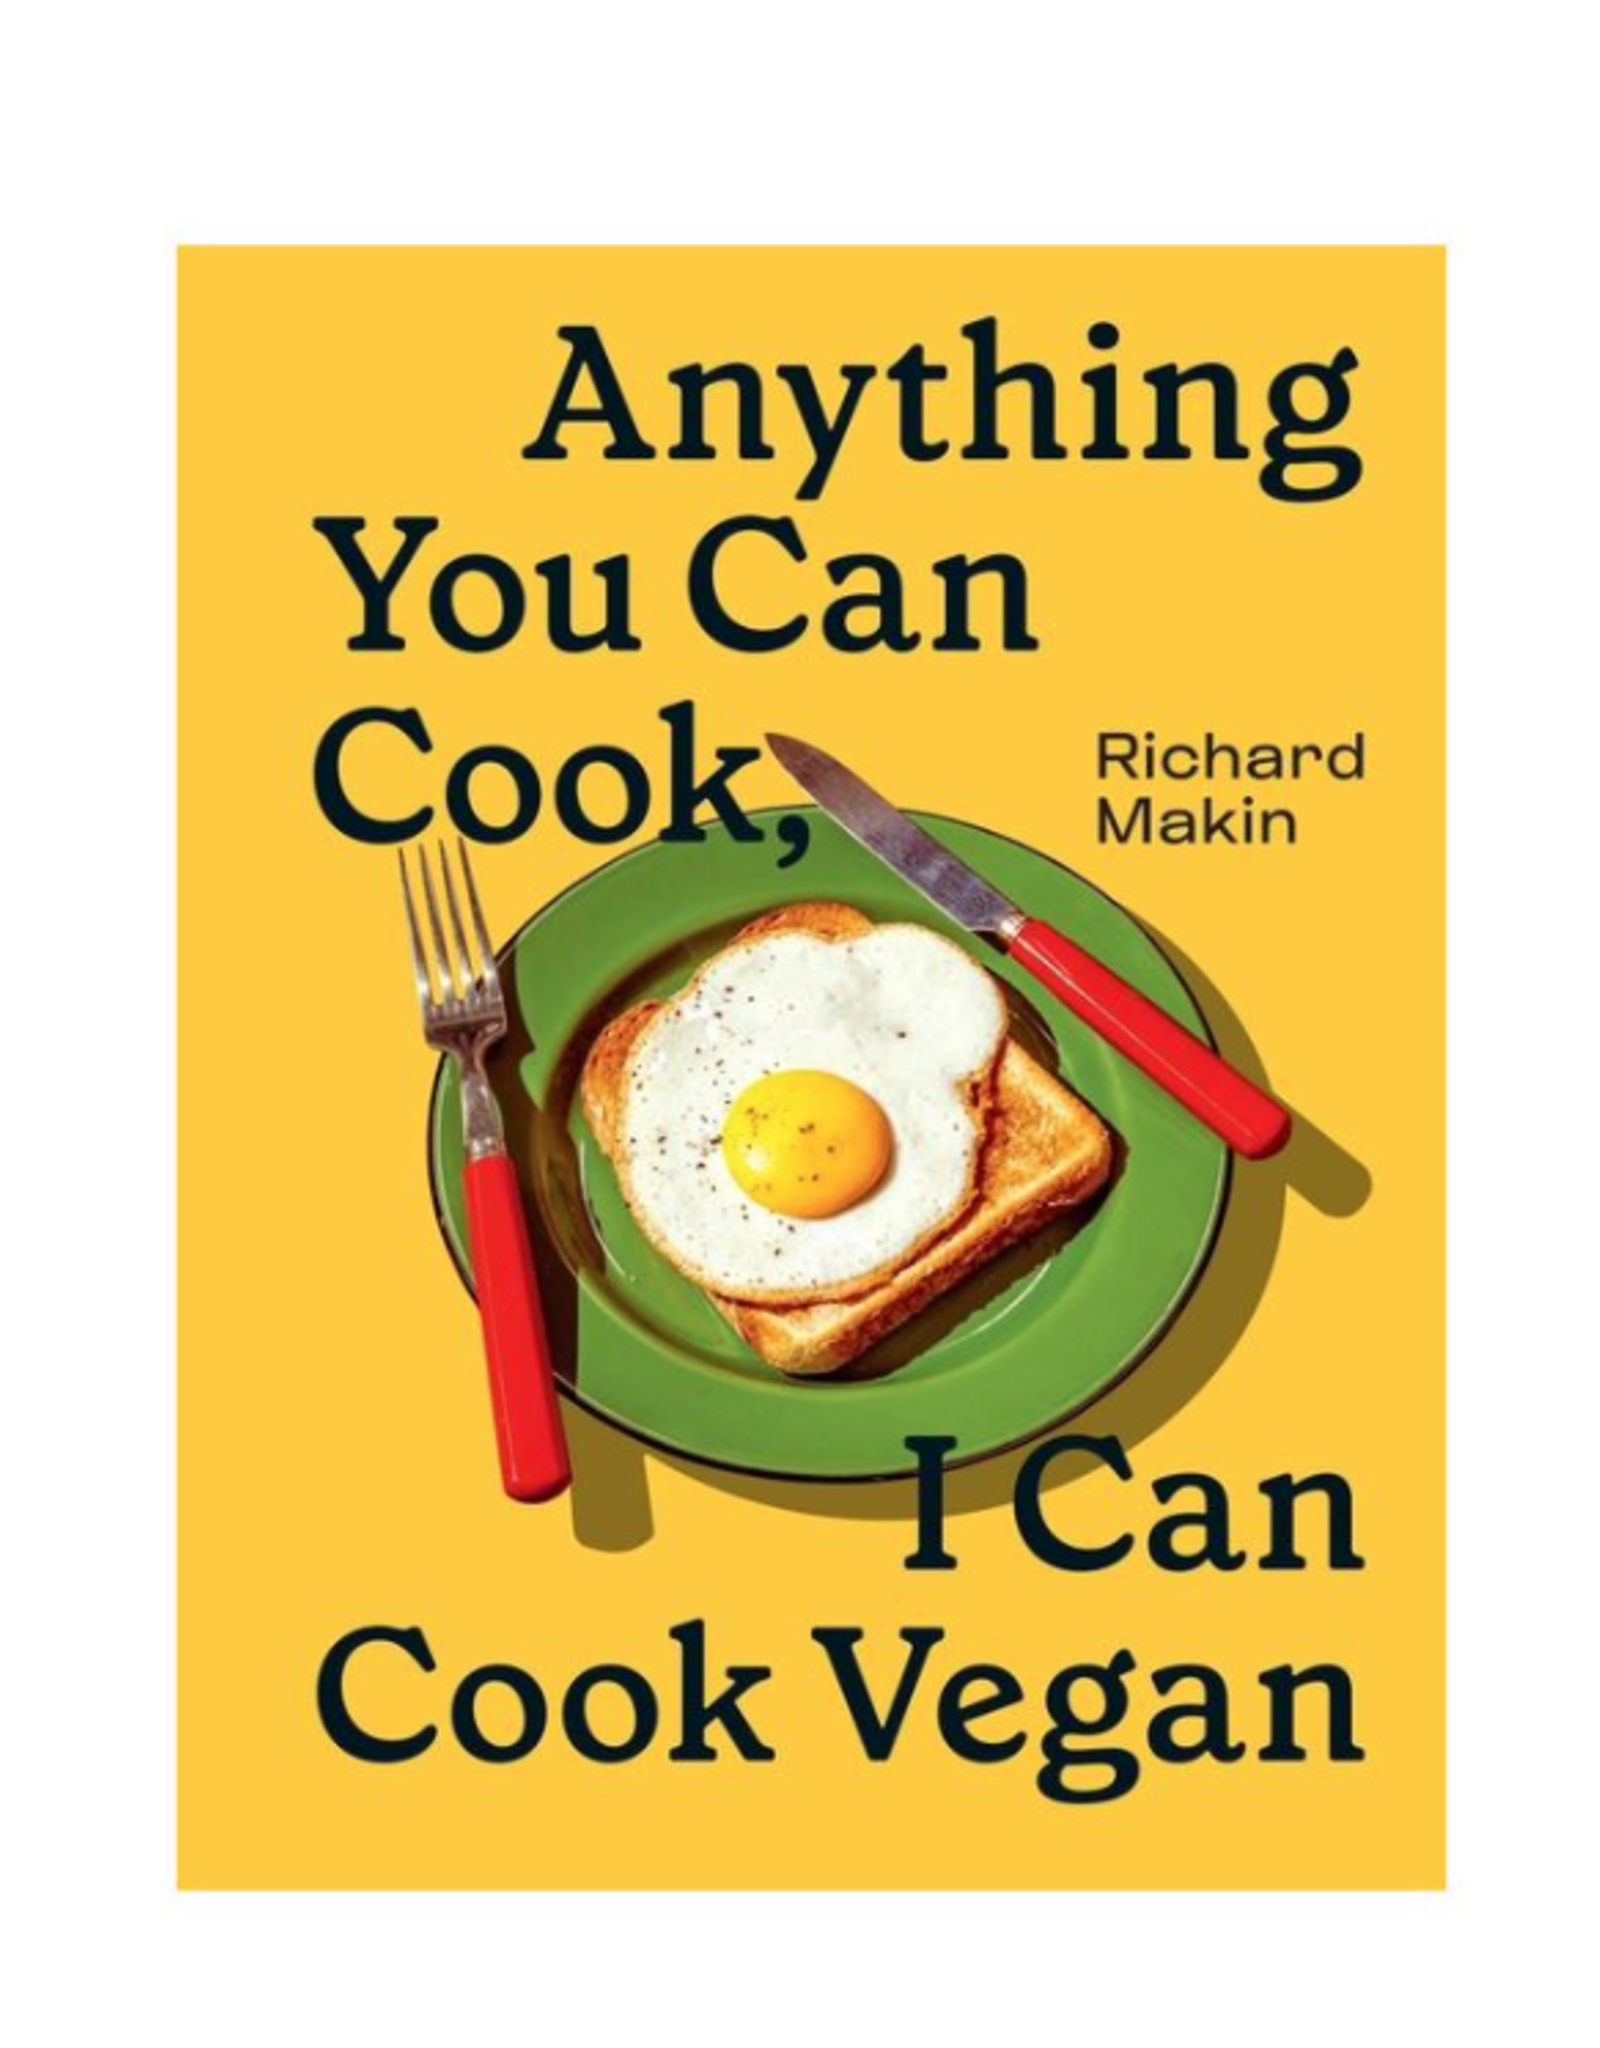 Simon & Schuster Anything You Can Cook, I Can Cook Vegan